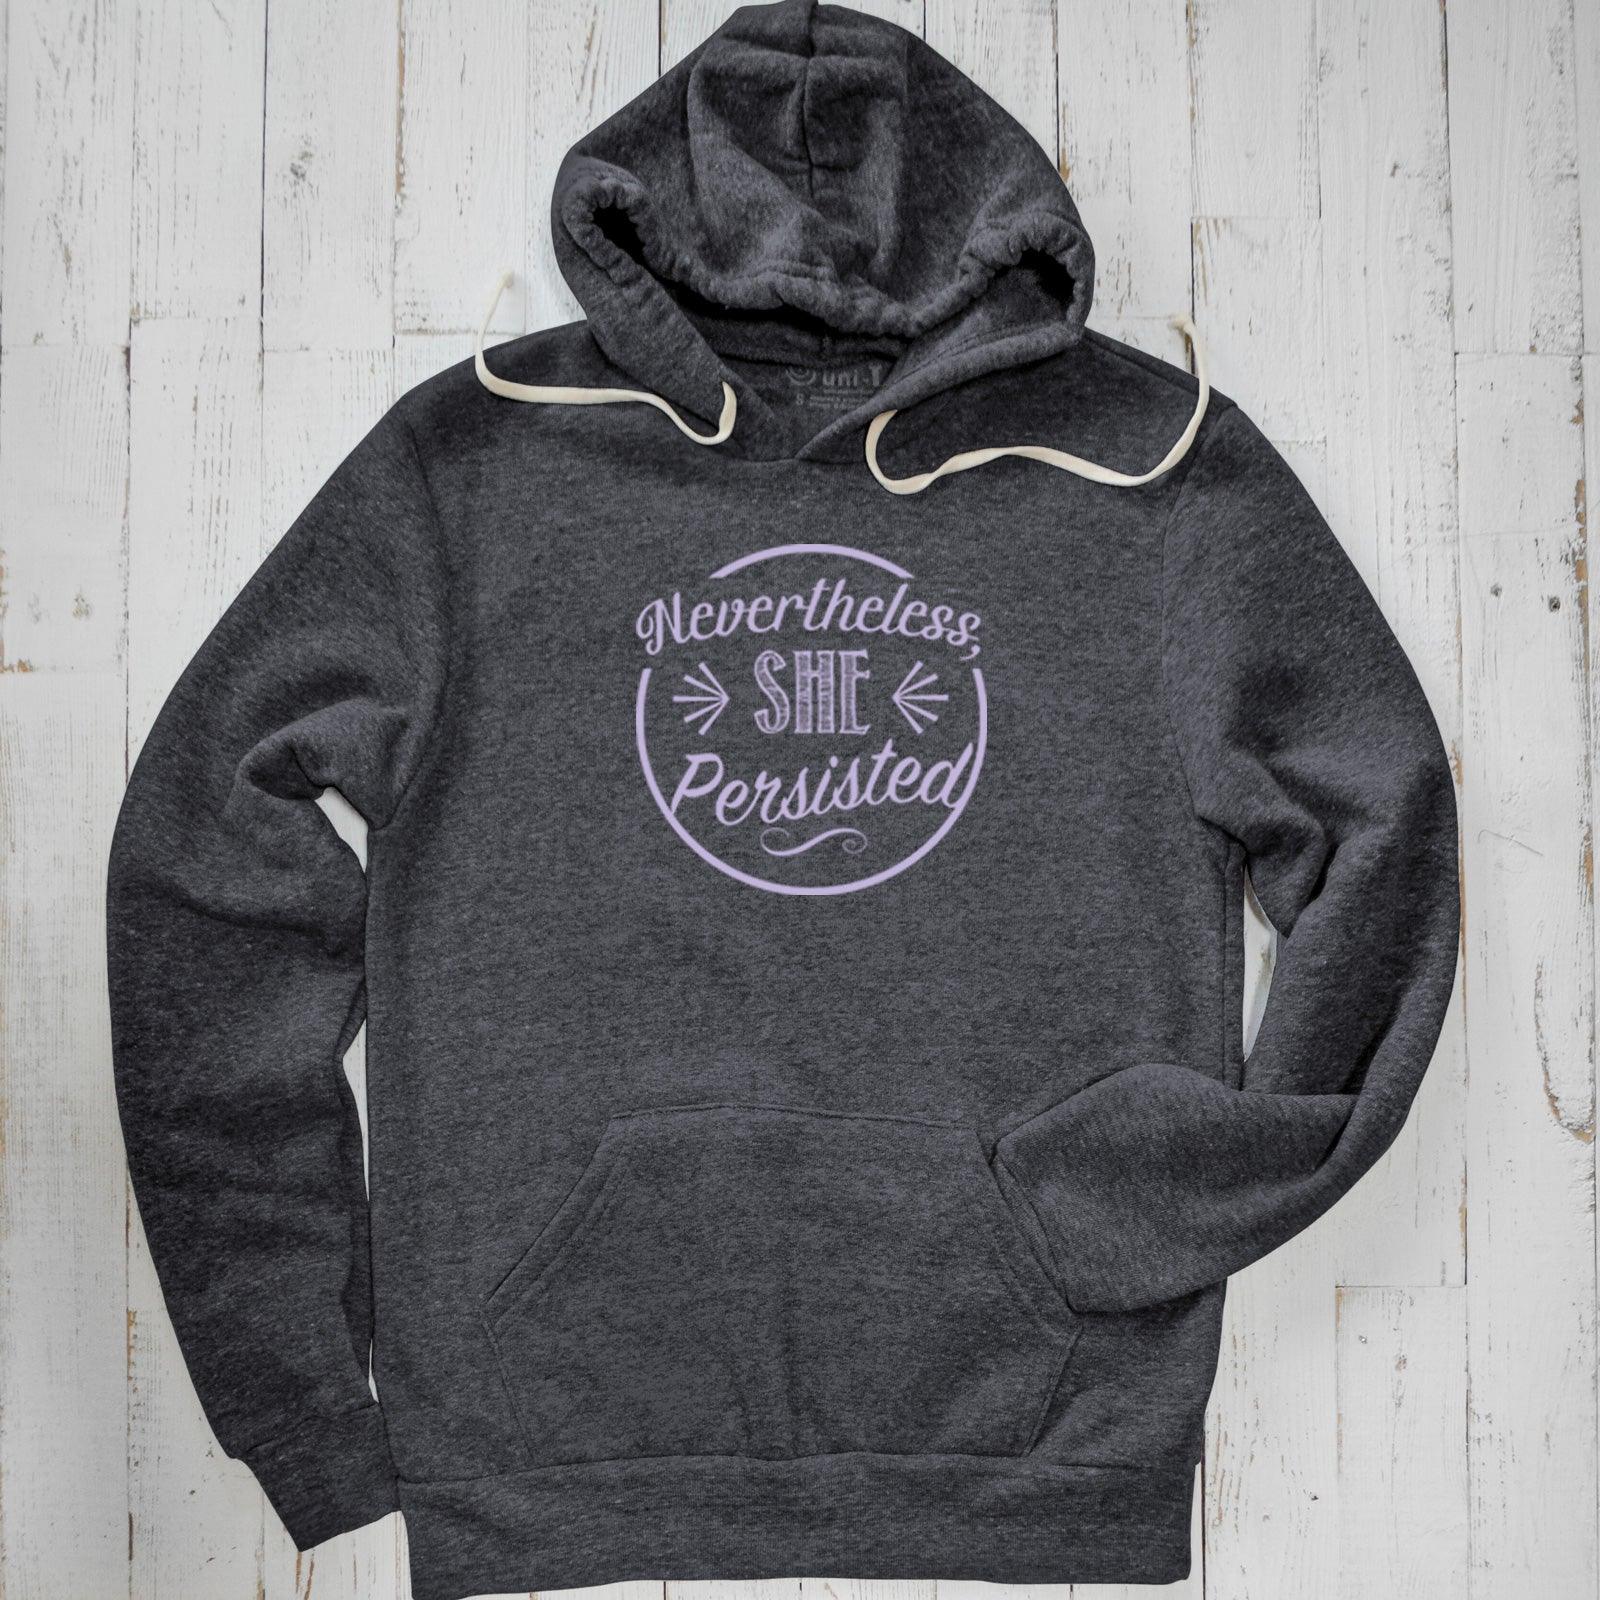 Nevertheless She Persisted Unisex Hoodie Uni-T